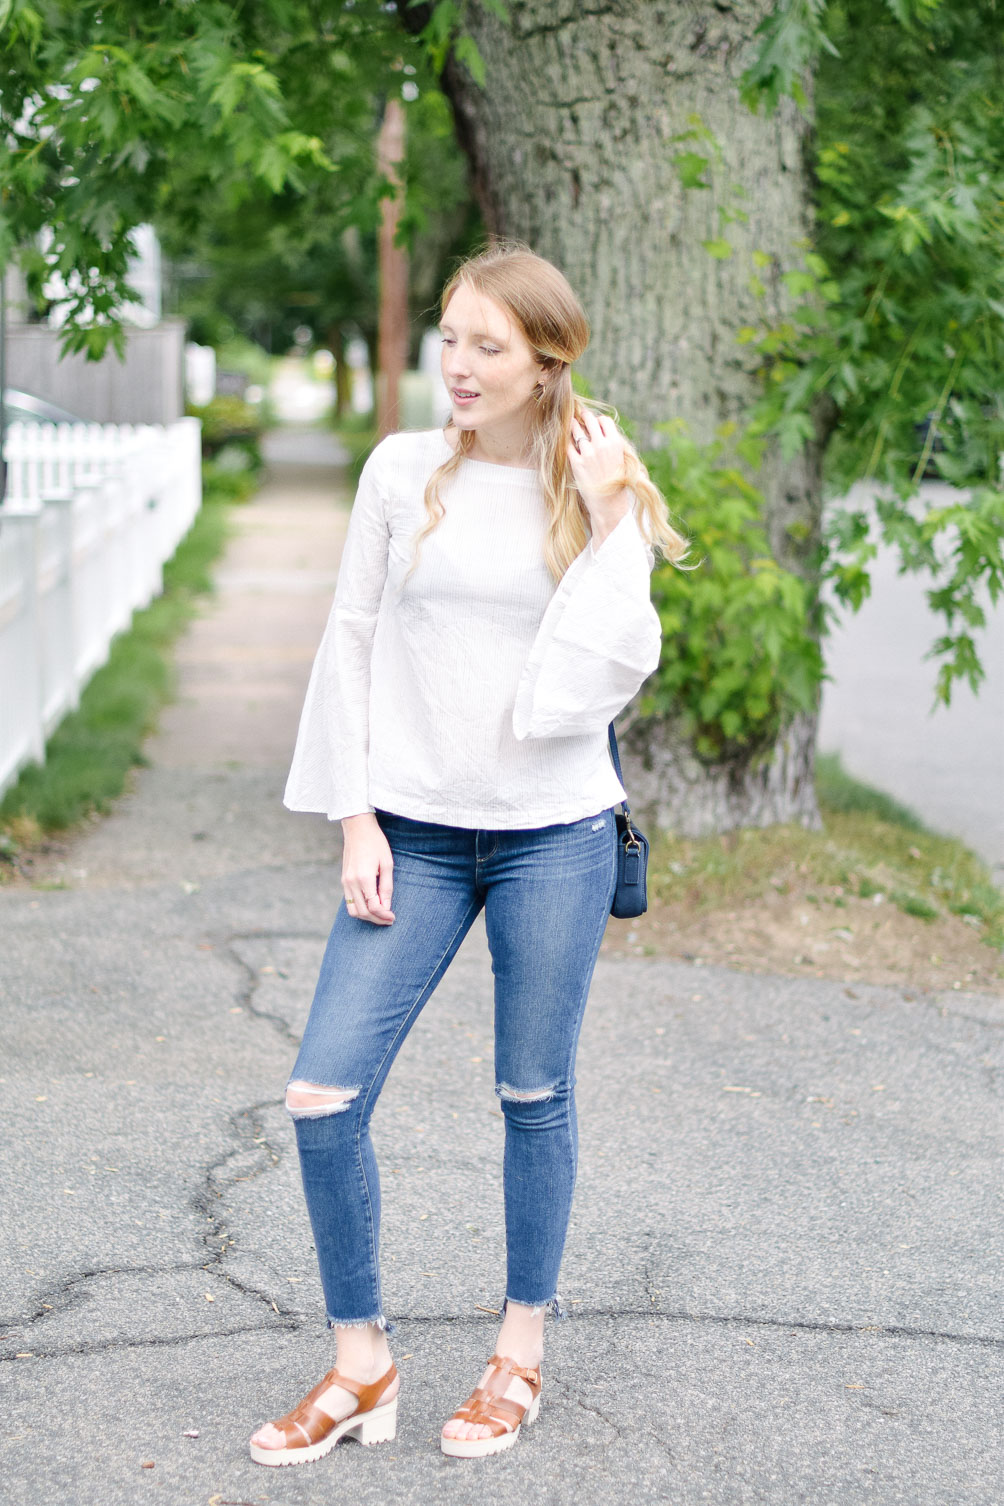 fashion blogger Leslie Musser styling transitional basics to wear from summer into fall with this casual outfit